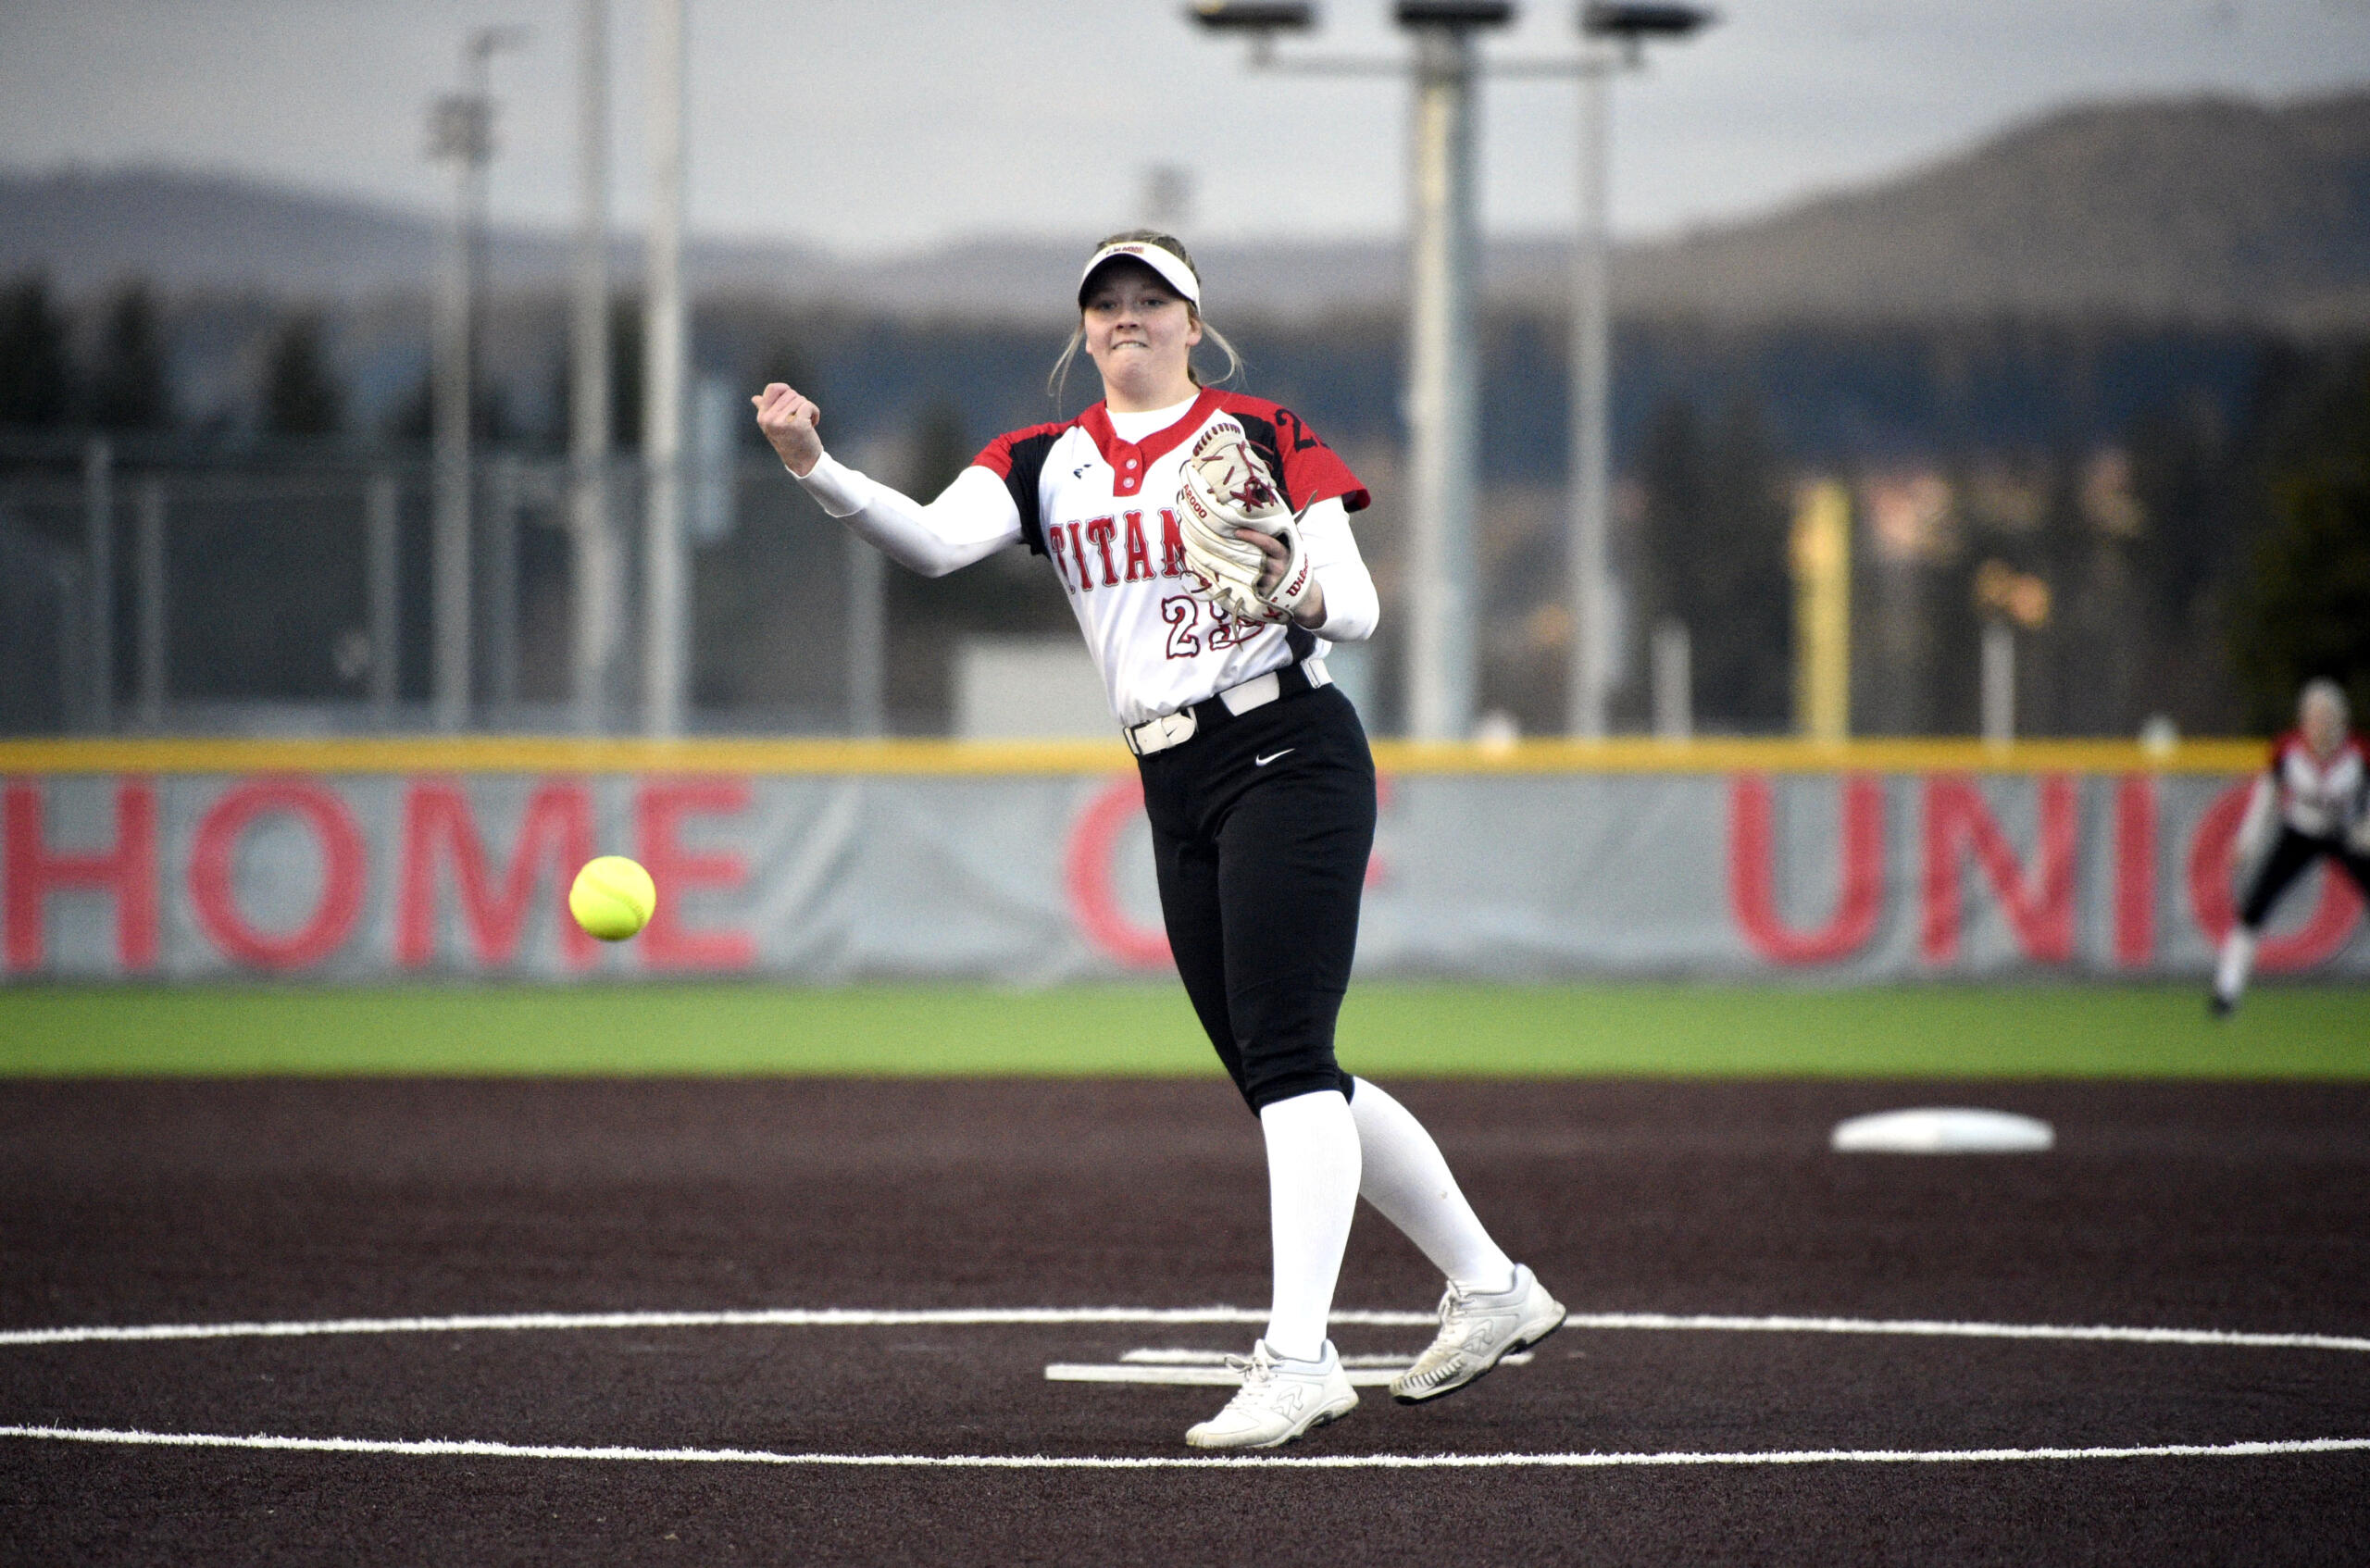 Union’s McKinley Ermshar releases a pitch against Battle Ground on Wednesday, March 29, 2023, at Union High School.